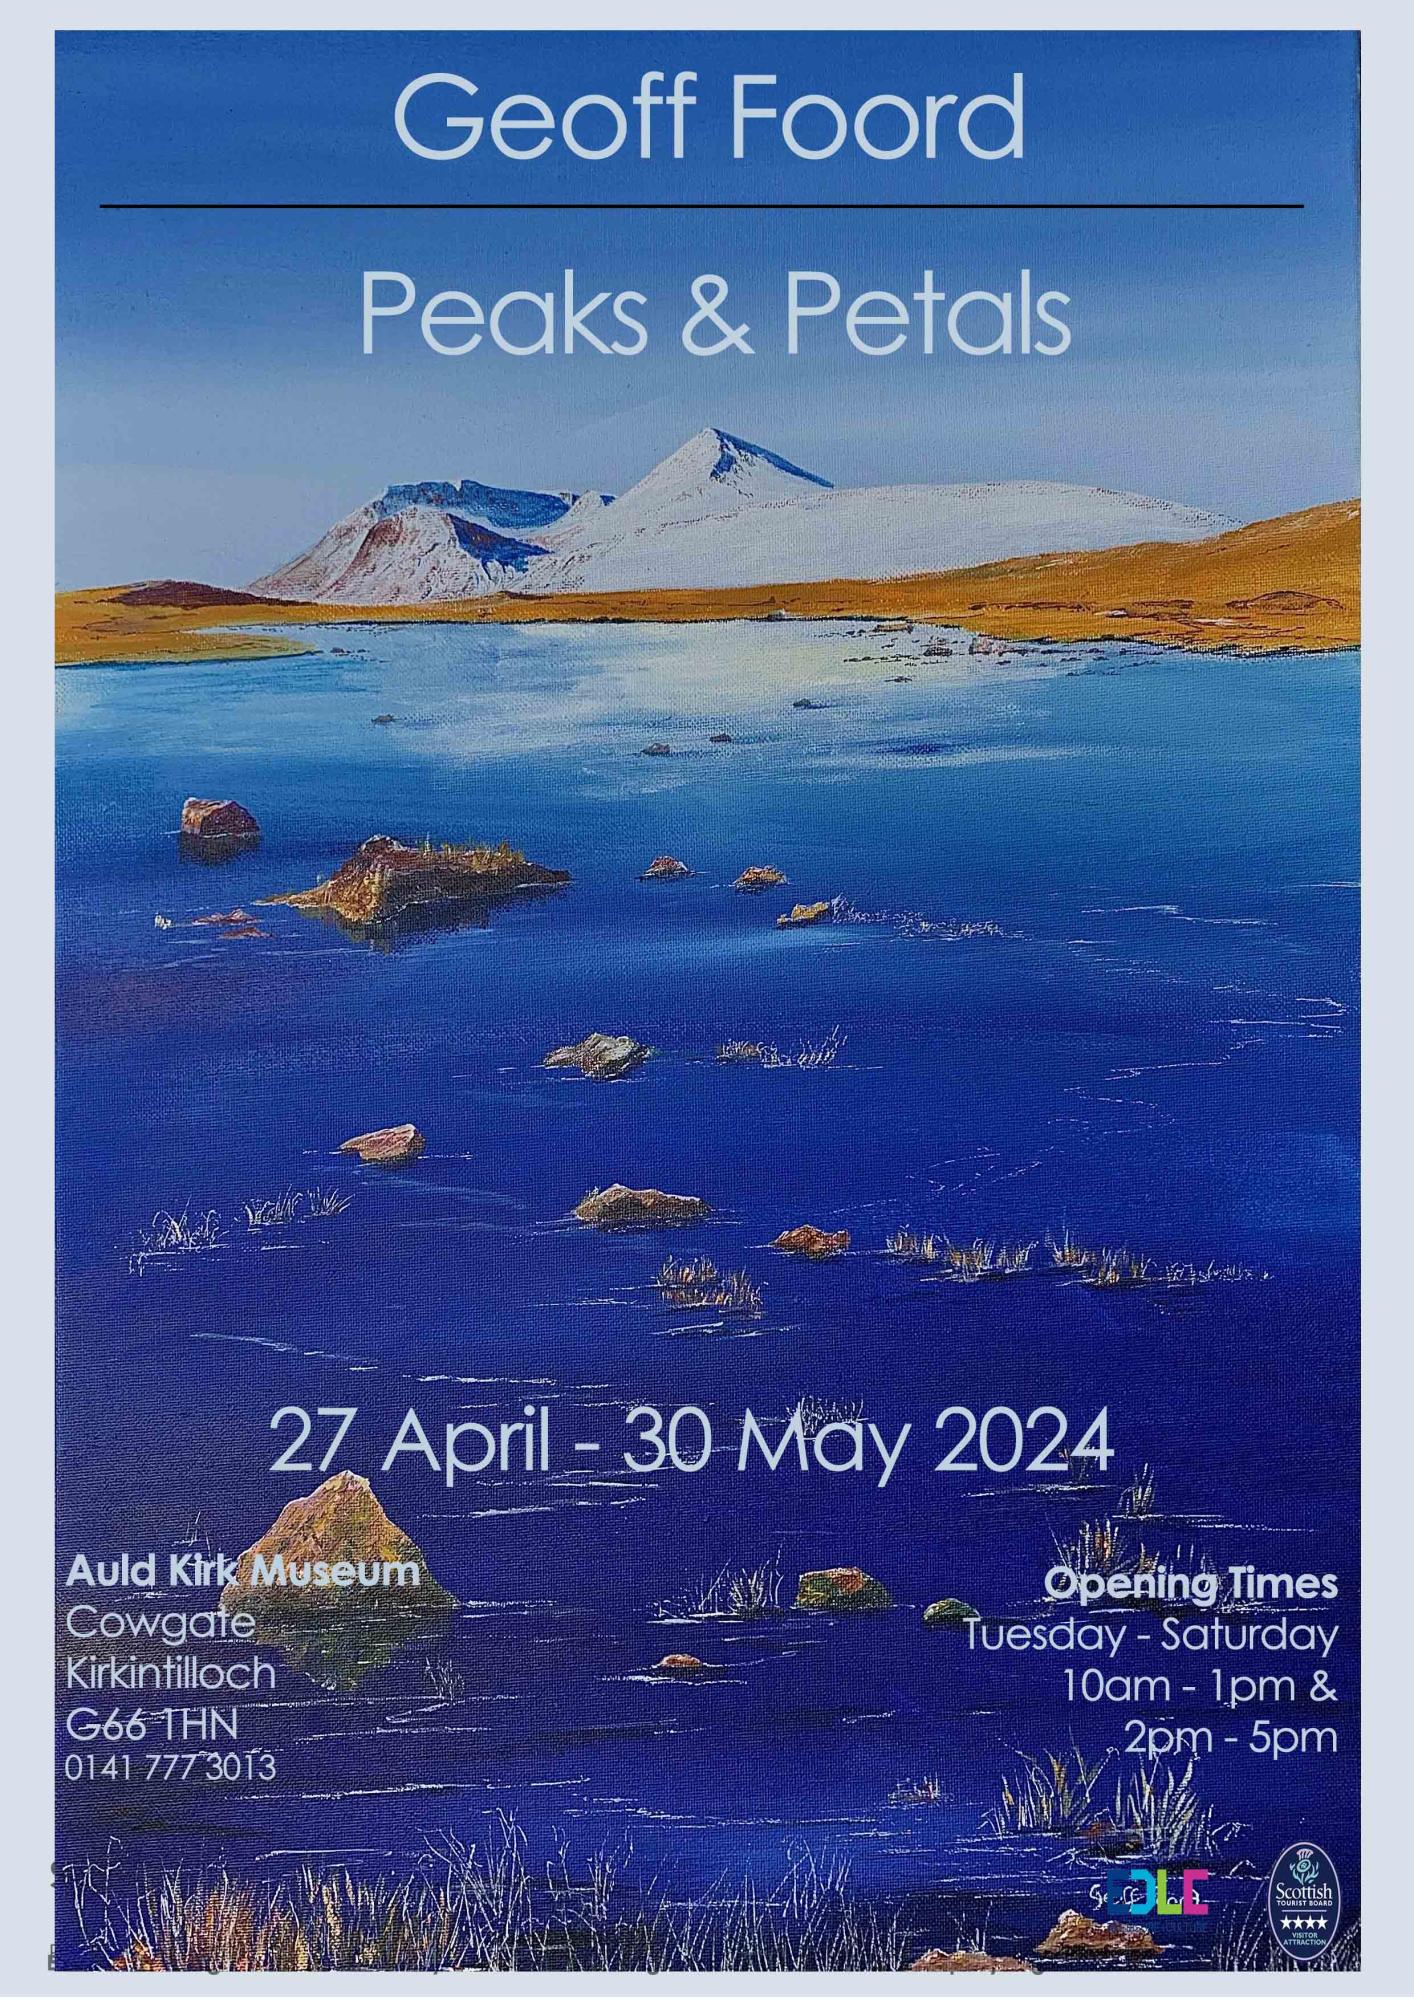 Event poster - painting of a landscape with wording: 'Geoff Foord – Peaks and Petals' is on from 27 April to 30 May 2024 at the Auld Kirk Museum, Cowgate, Kirkintilloch, G66 1HN. Open Tuesday-Saturday, 10am-1pm and 2-5pm. Closed Sunday and Monday. Admission is free. The official opening takes place on Saturday 27 April at 2.30pm – all welcome.